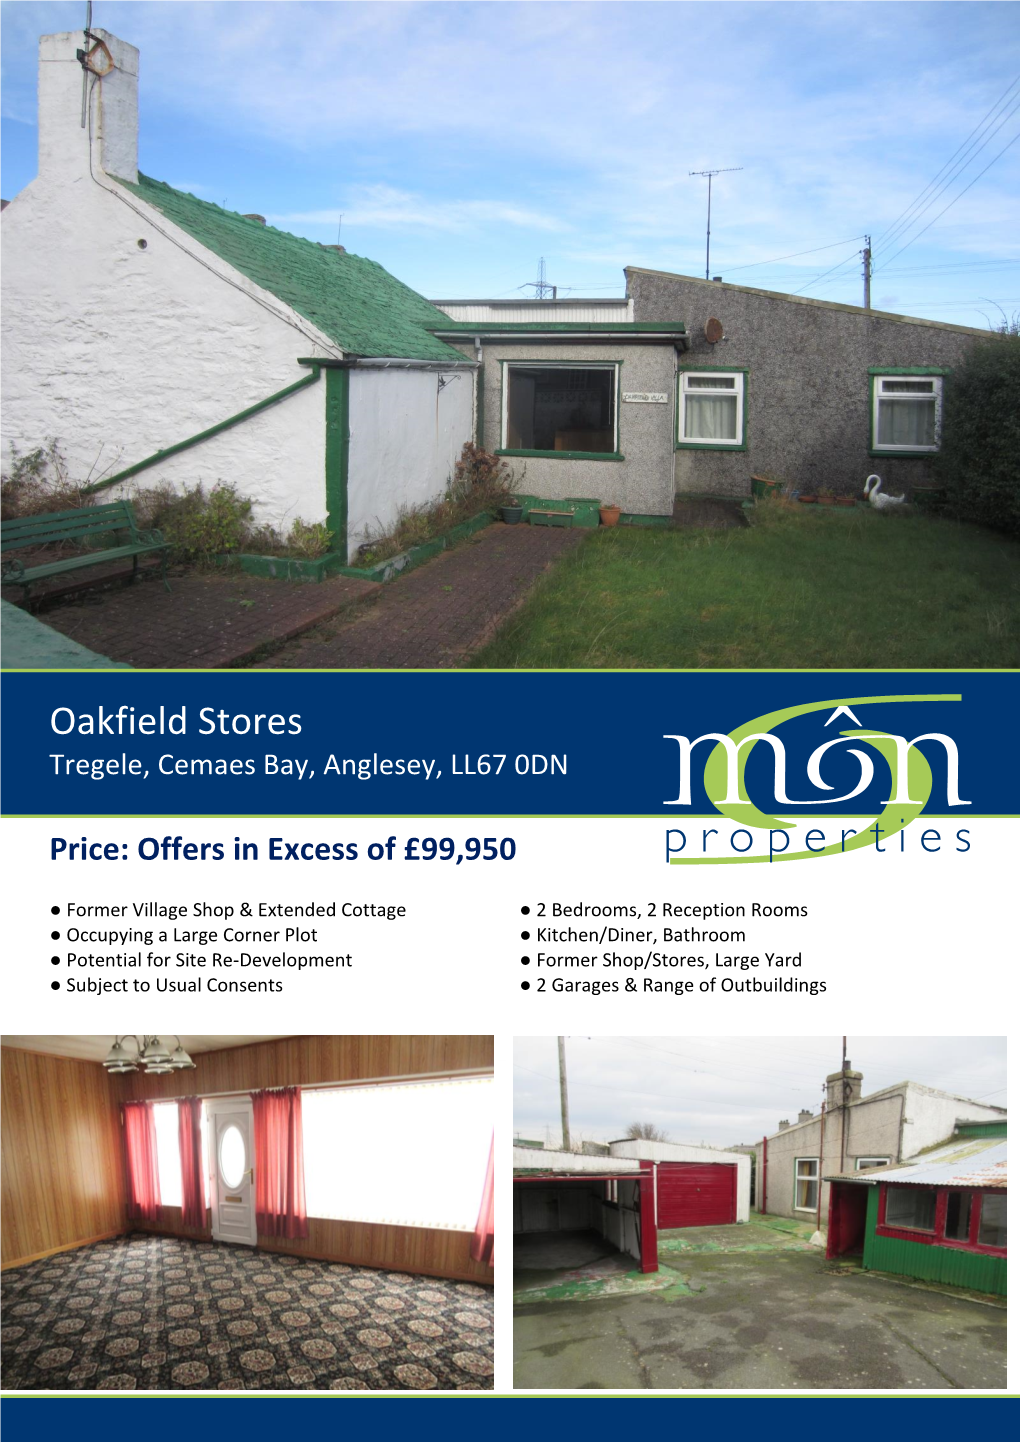 Oakfield Stores Tregele, Cemaes Bay, Anglesey, LL67 0DN